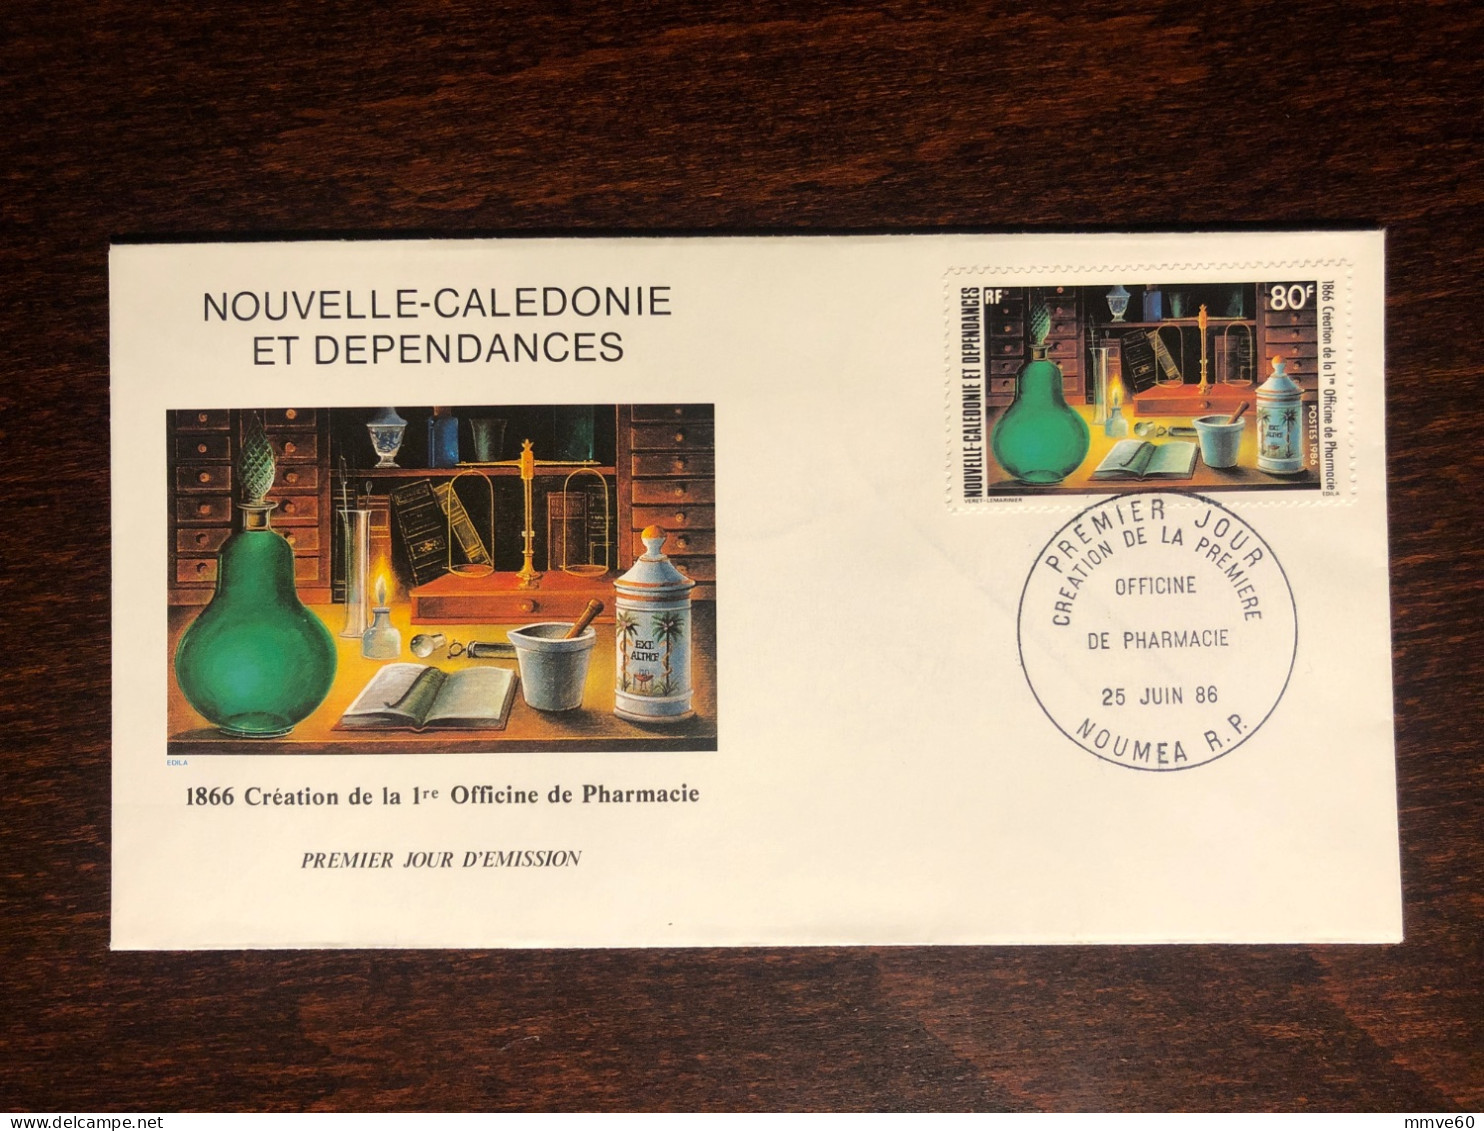 NEW CALEDONIA NOUVELLE CALEDONIE FDC COVER 1986 YEAR PHARMACY PHARMACEUTICAL HEALTH MEDICINE - Covers & Documents